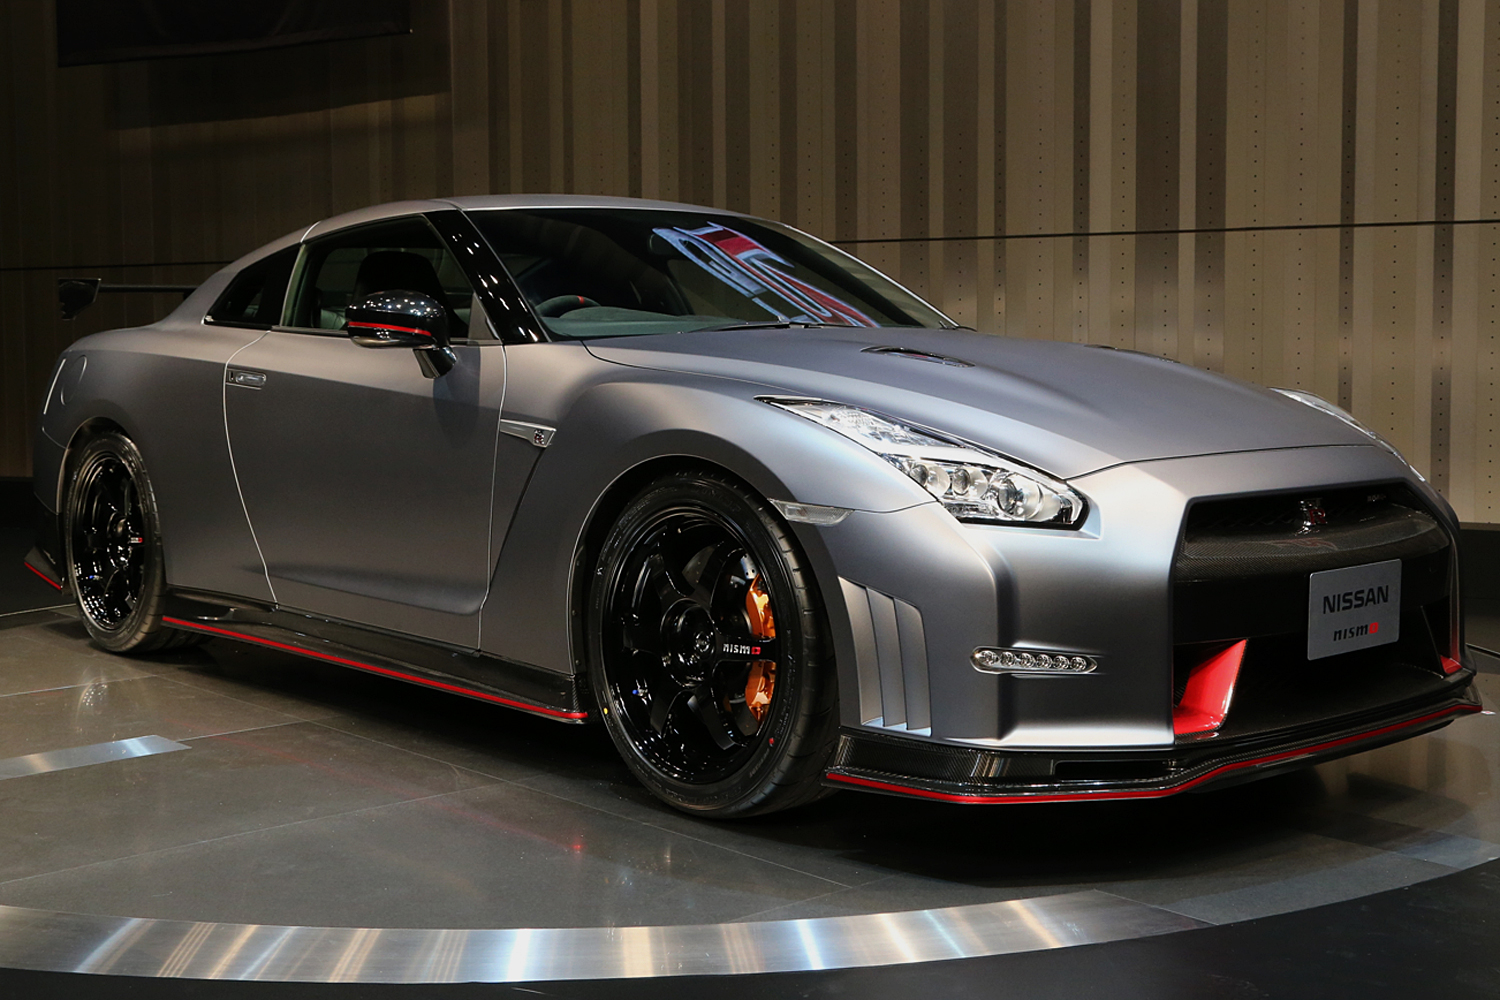 2015 Nissan GT-R NISMO Pics, Vehicles Collection